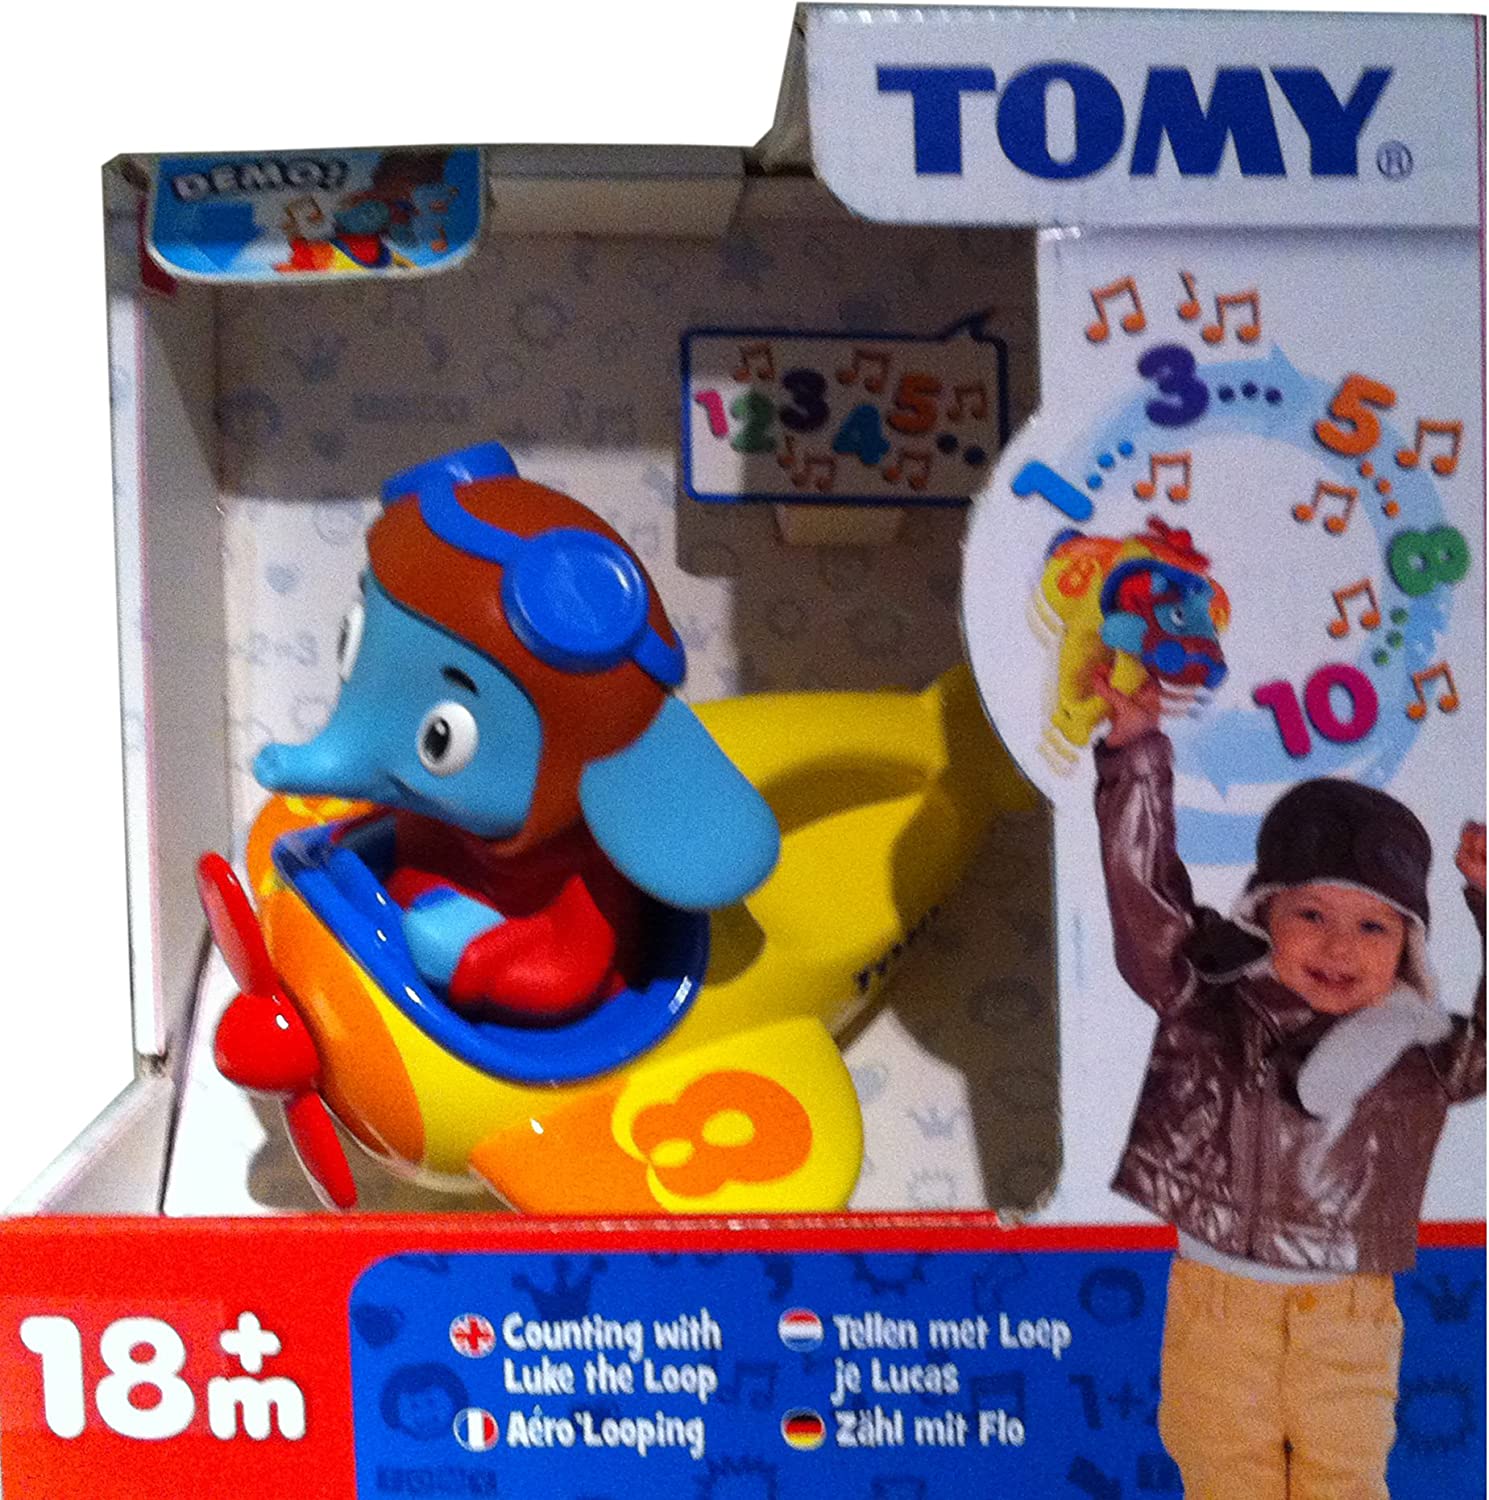 Tomy Counting with Luke the Loop - A & M News and Gifts